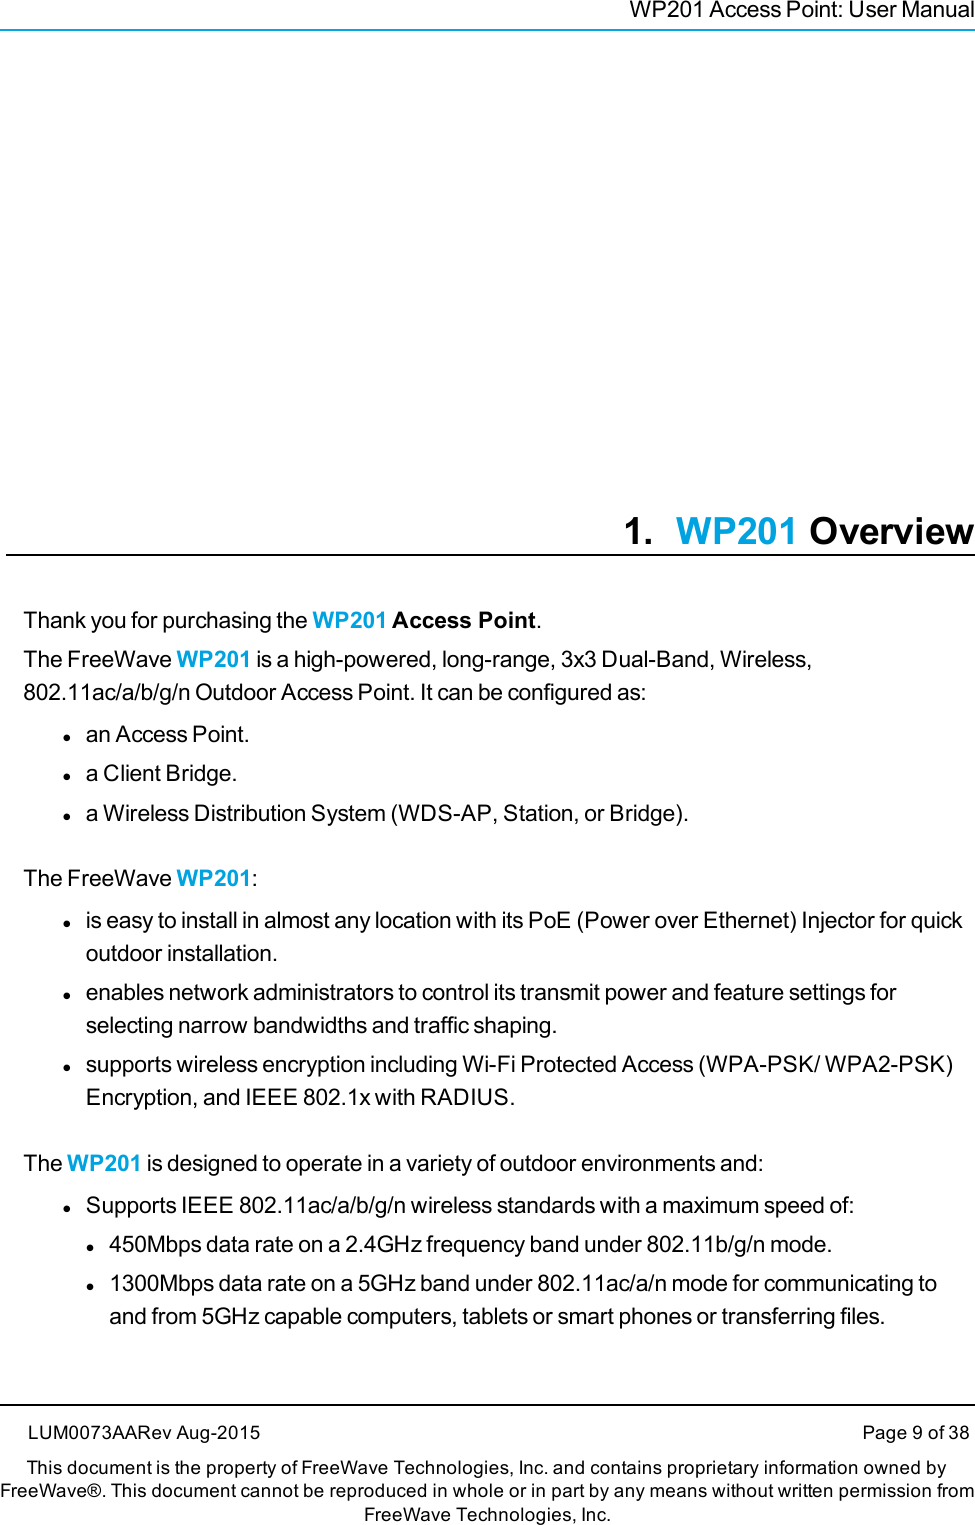 WP201 Access Point: User Manual1. WP201 OverviewThank you for purchasing the WP201 Access Point.The FreeWave WP201 is a high-powered, long-range, 3x3 Dual-Band, Wireless,802.11ac/a/b/g/n Outdoor Access Point. It can be configured as:lan Access Point.la Client Bridge.la Wireless Distribution System (WDS-AP, Station, or Bridge).The FreeWave WP201:lis easy to install in almost any location with its PoE (Power over Ethernet) Injector for quickoutdoor installation.lenables network administrators to control its transmit power and feature settings forselecting narrow bandwidths and traffic shaping.lsupports wireless encryption including Wi-Fi Protected Access (WPA-PSK/ WPA2-PSK)Encryption, and IEEE 802.1x with RADIUS.The WP201 is designed to operate in a variety of outdoor environments and:lSupports IEEE 802.11ac/a/b/g/n wireless standards with a maximum speed of:l450Mbps data rate on a 2.4GHz frequency band under 802.11b/g/n mode.l1300Mbps data rate on a 5GHz band under 802.11ac/a/n mode for communicating toand from 5GHz capable computers, tablets or smart phones or transferring files.LUM0073AARev Aug-2015 Page 9 of 38This document is the property of FreeWave Technologies, Inc. and contains proprietary information owned byFreeWave®. This document cannot be reproduced in whole or in part by any means without written permission fromFreeWave Technologies, Inc.